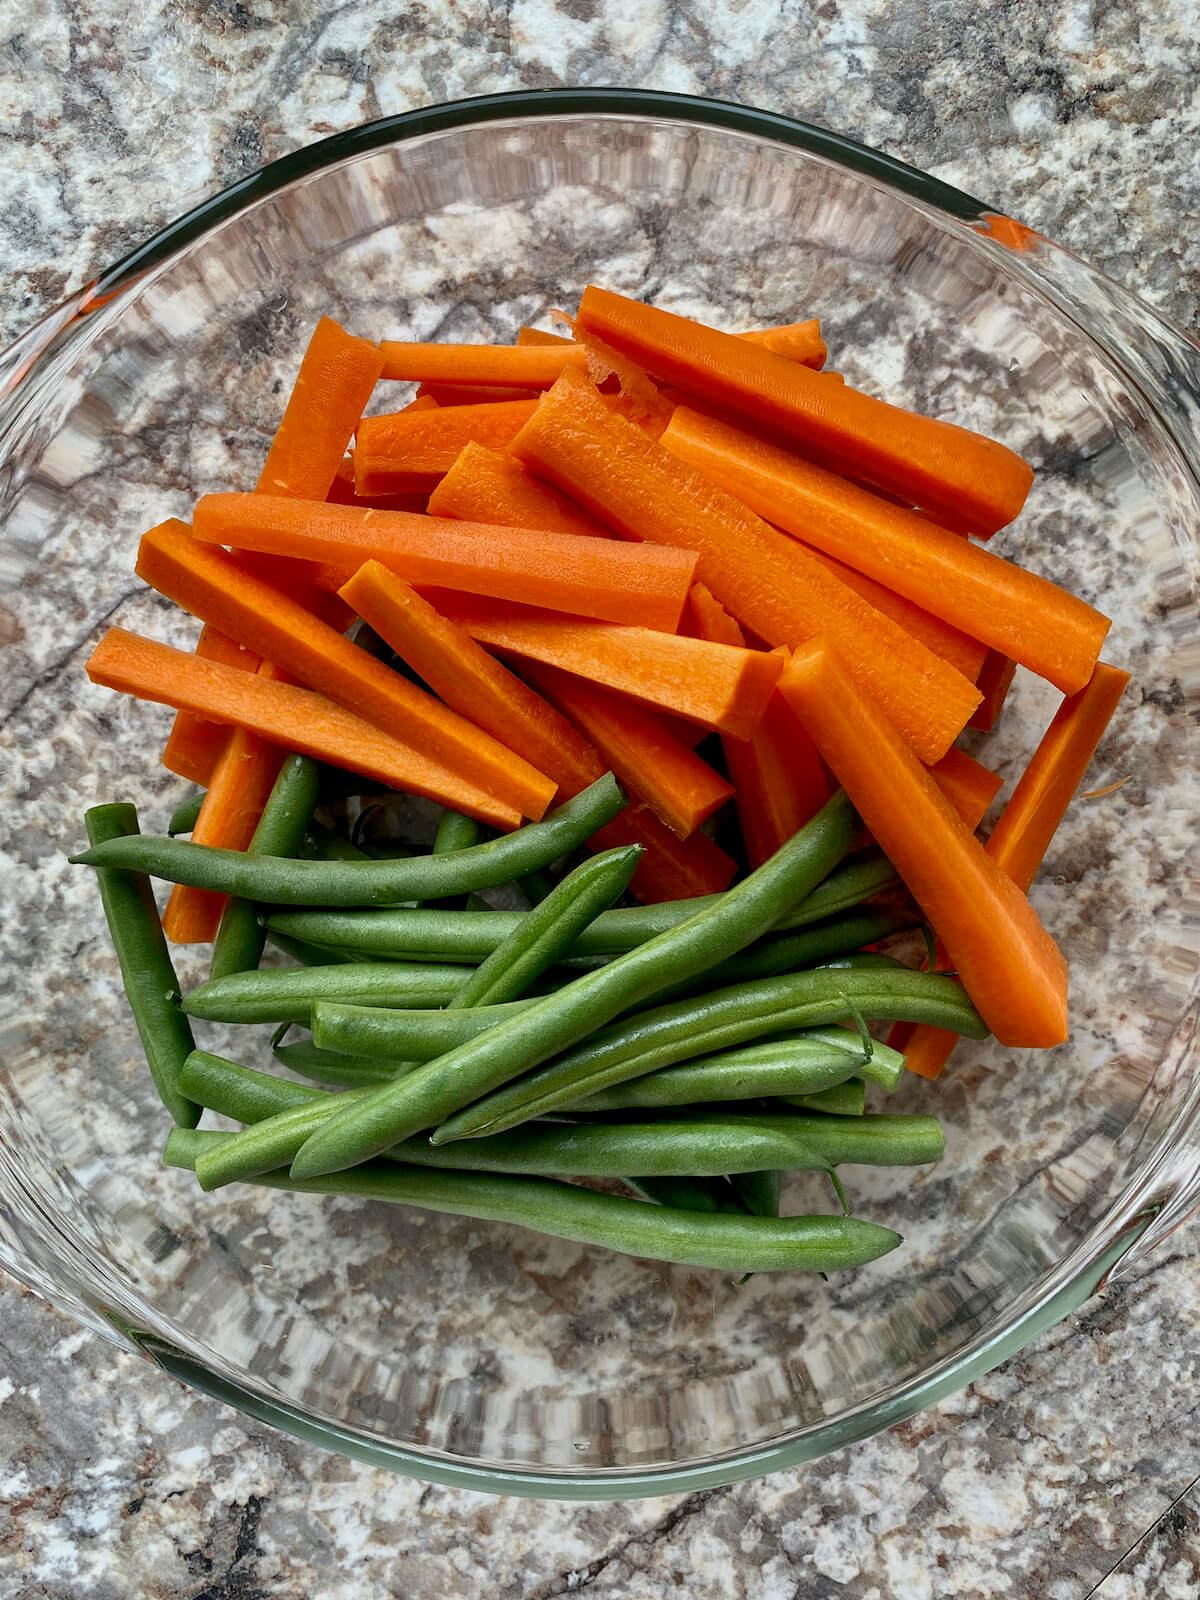 Prepared carrots and green beans in a glass mixing bowl.